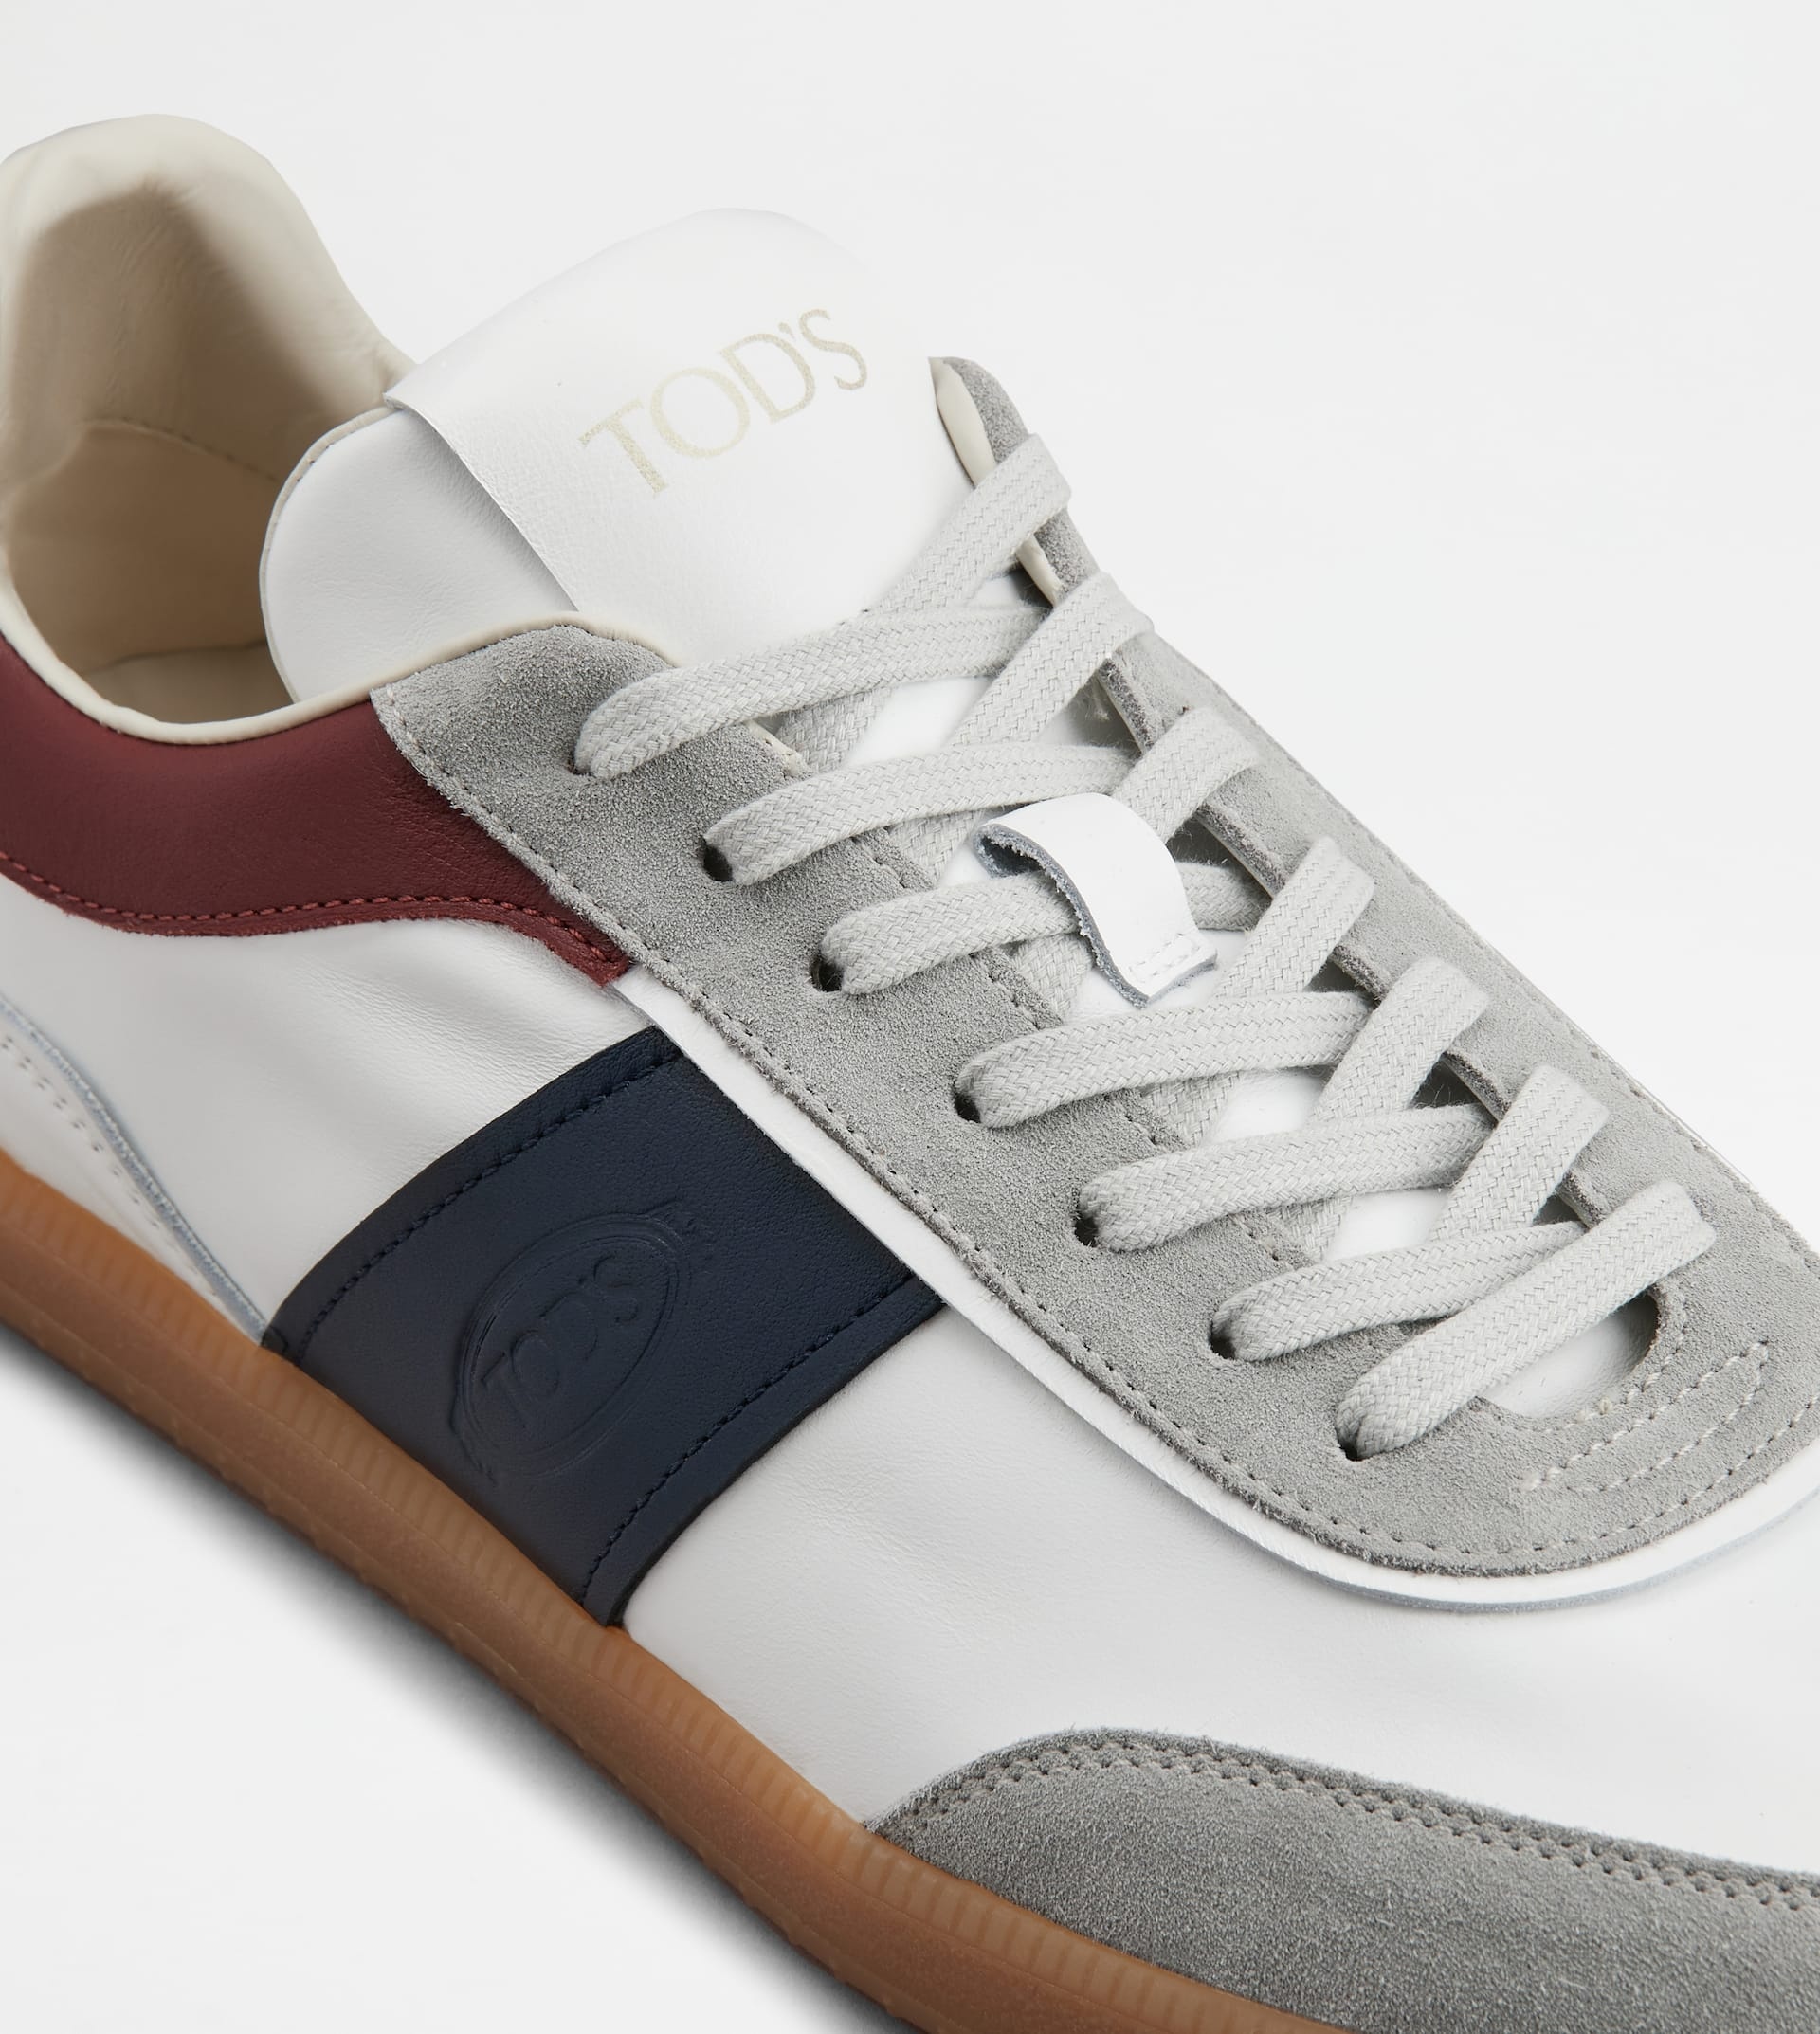 TOD'S TABS SNEAKERS IN SUEDE - WHITE, BLUE, BURGUNDY - 6